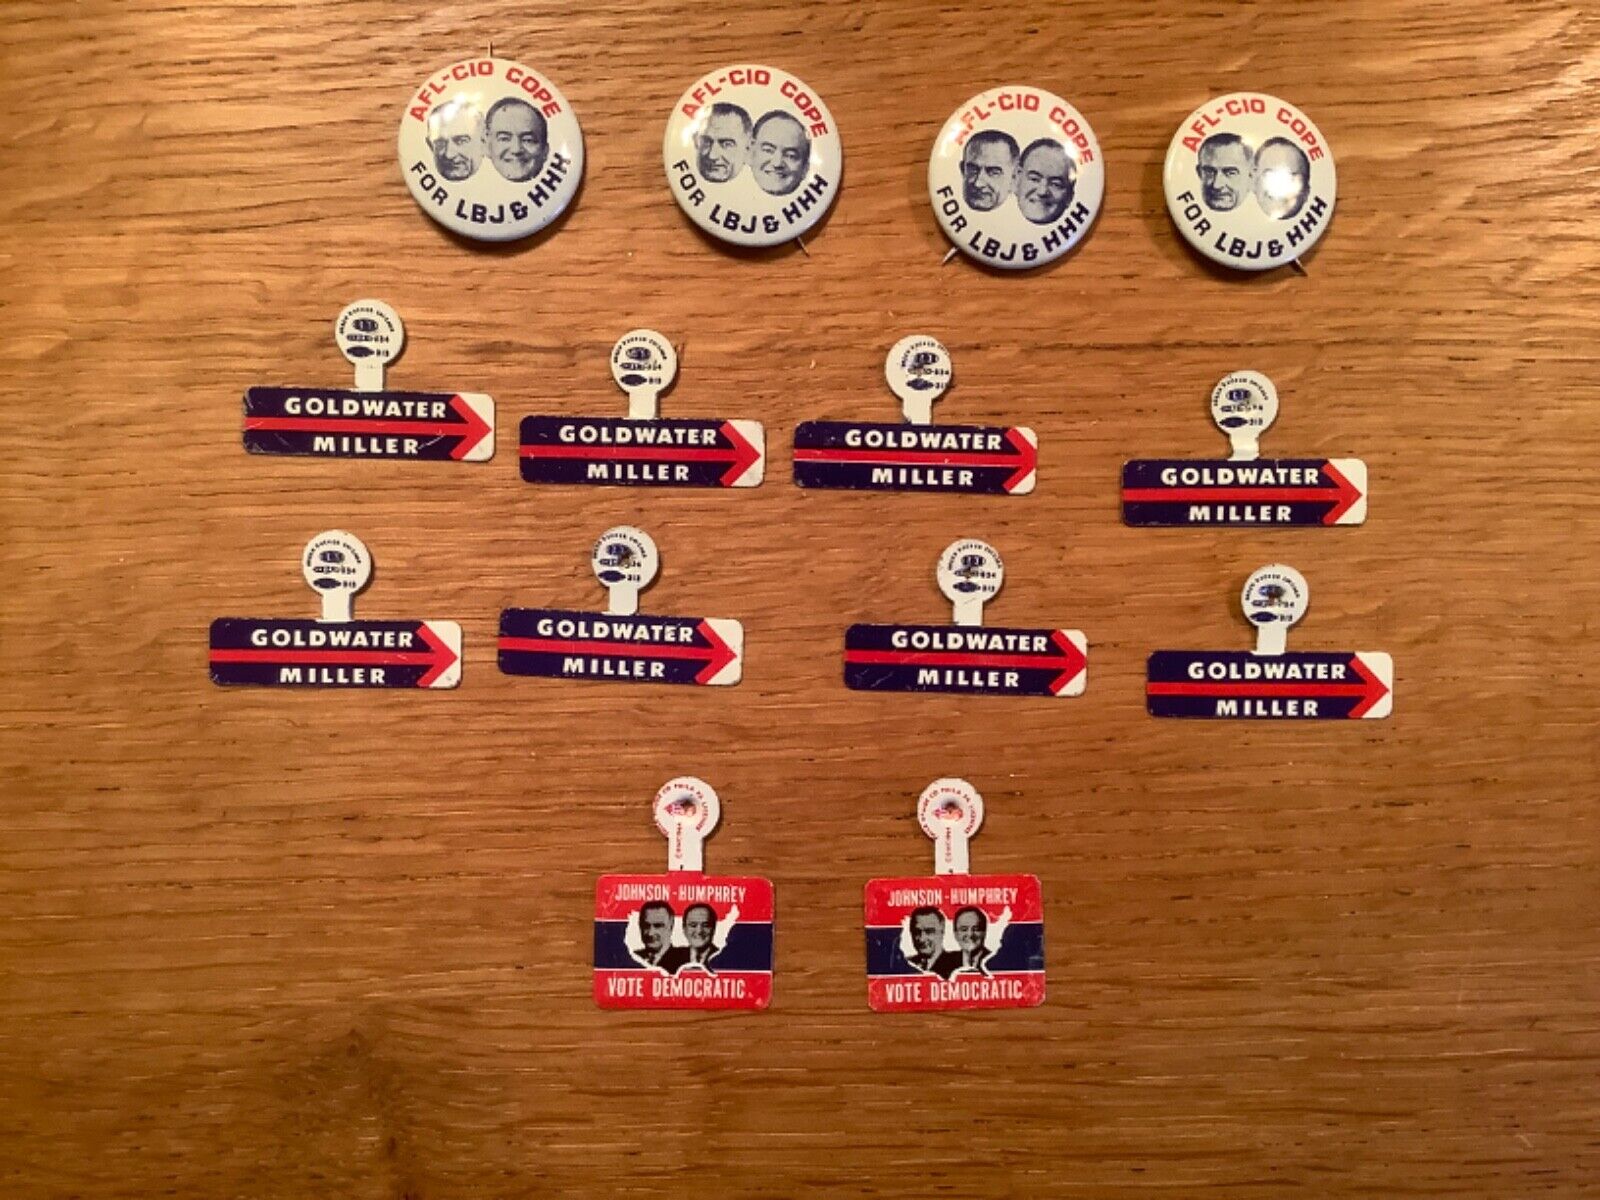 1964 LBJ HHH Goldwater Miller campaign buttons and clips